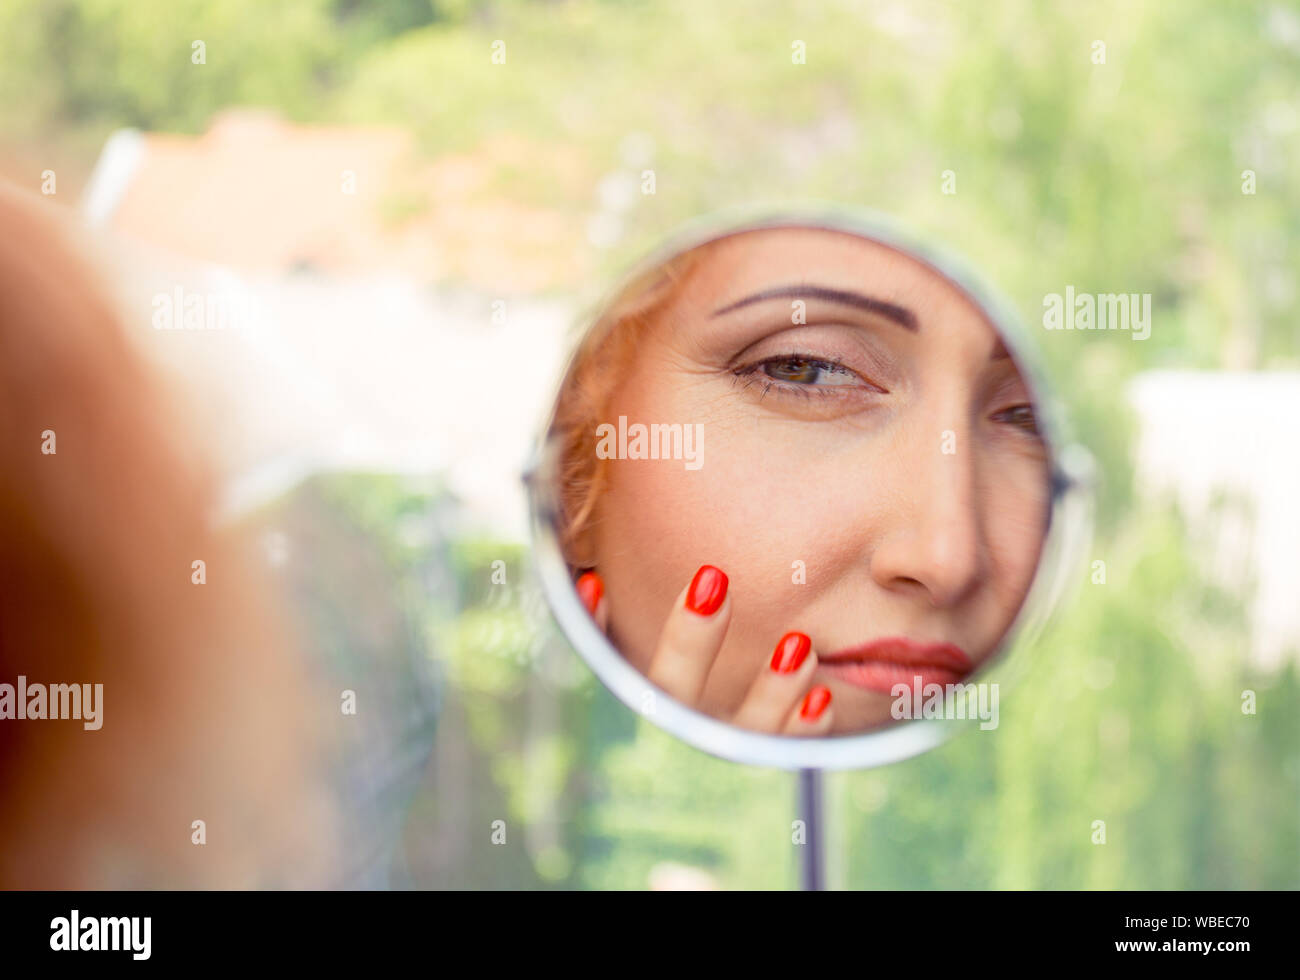 Woman looking, examining her nasolabial fold, her first signs of aging. Beauty and skincare concept of a mature woman. Stock Photo